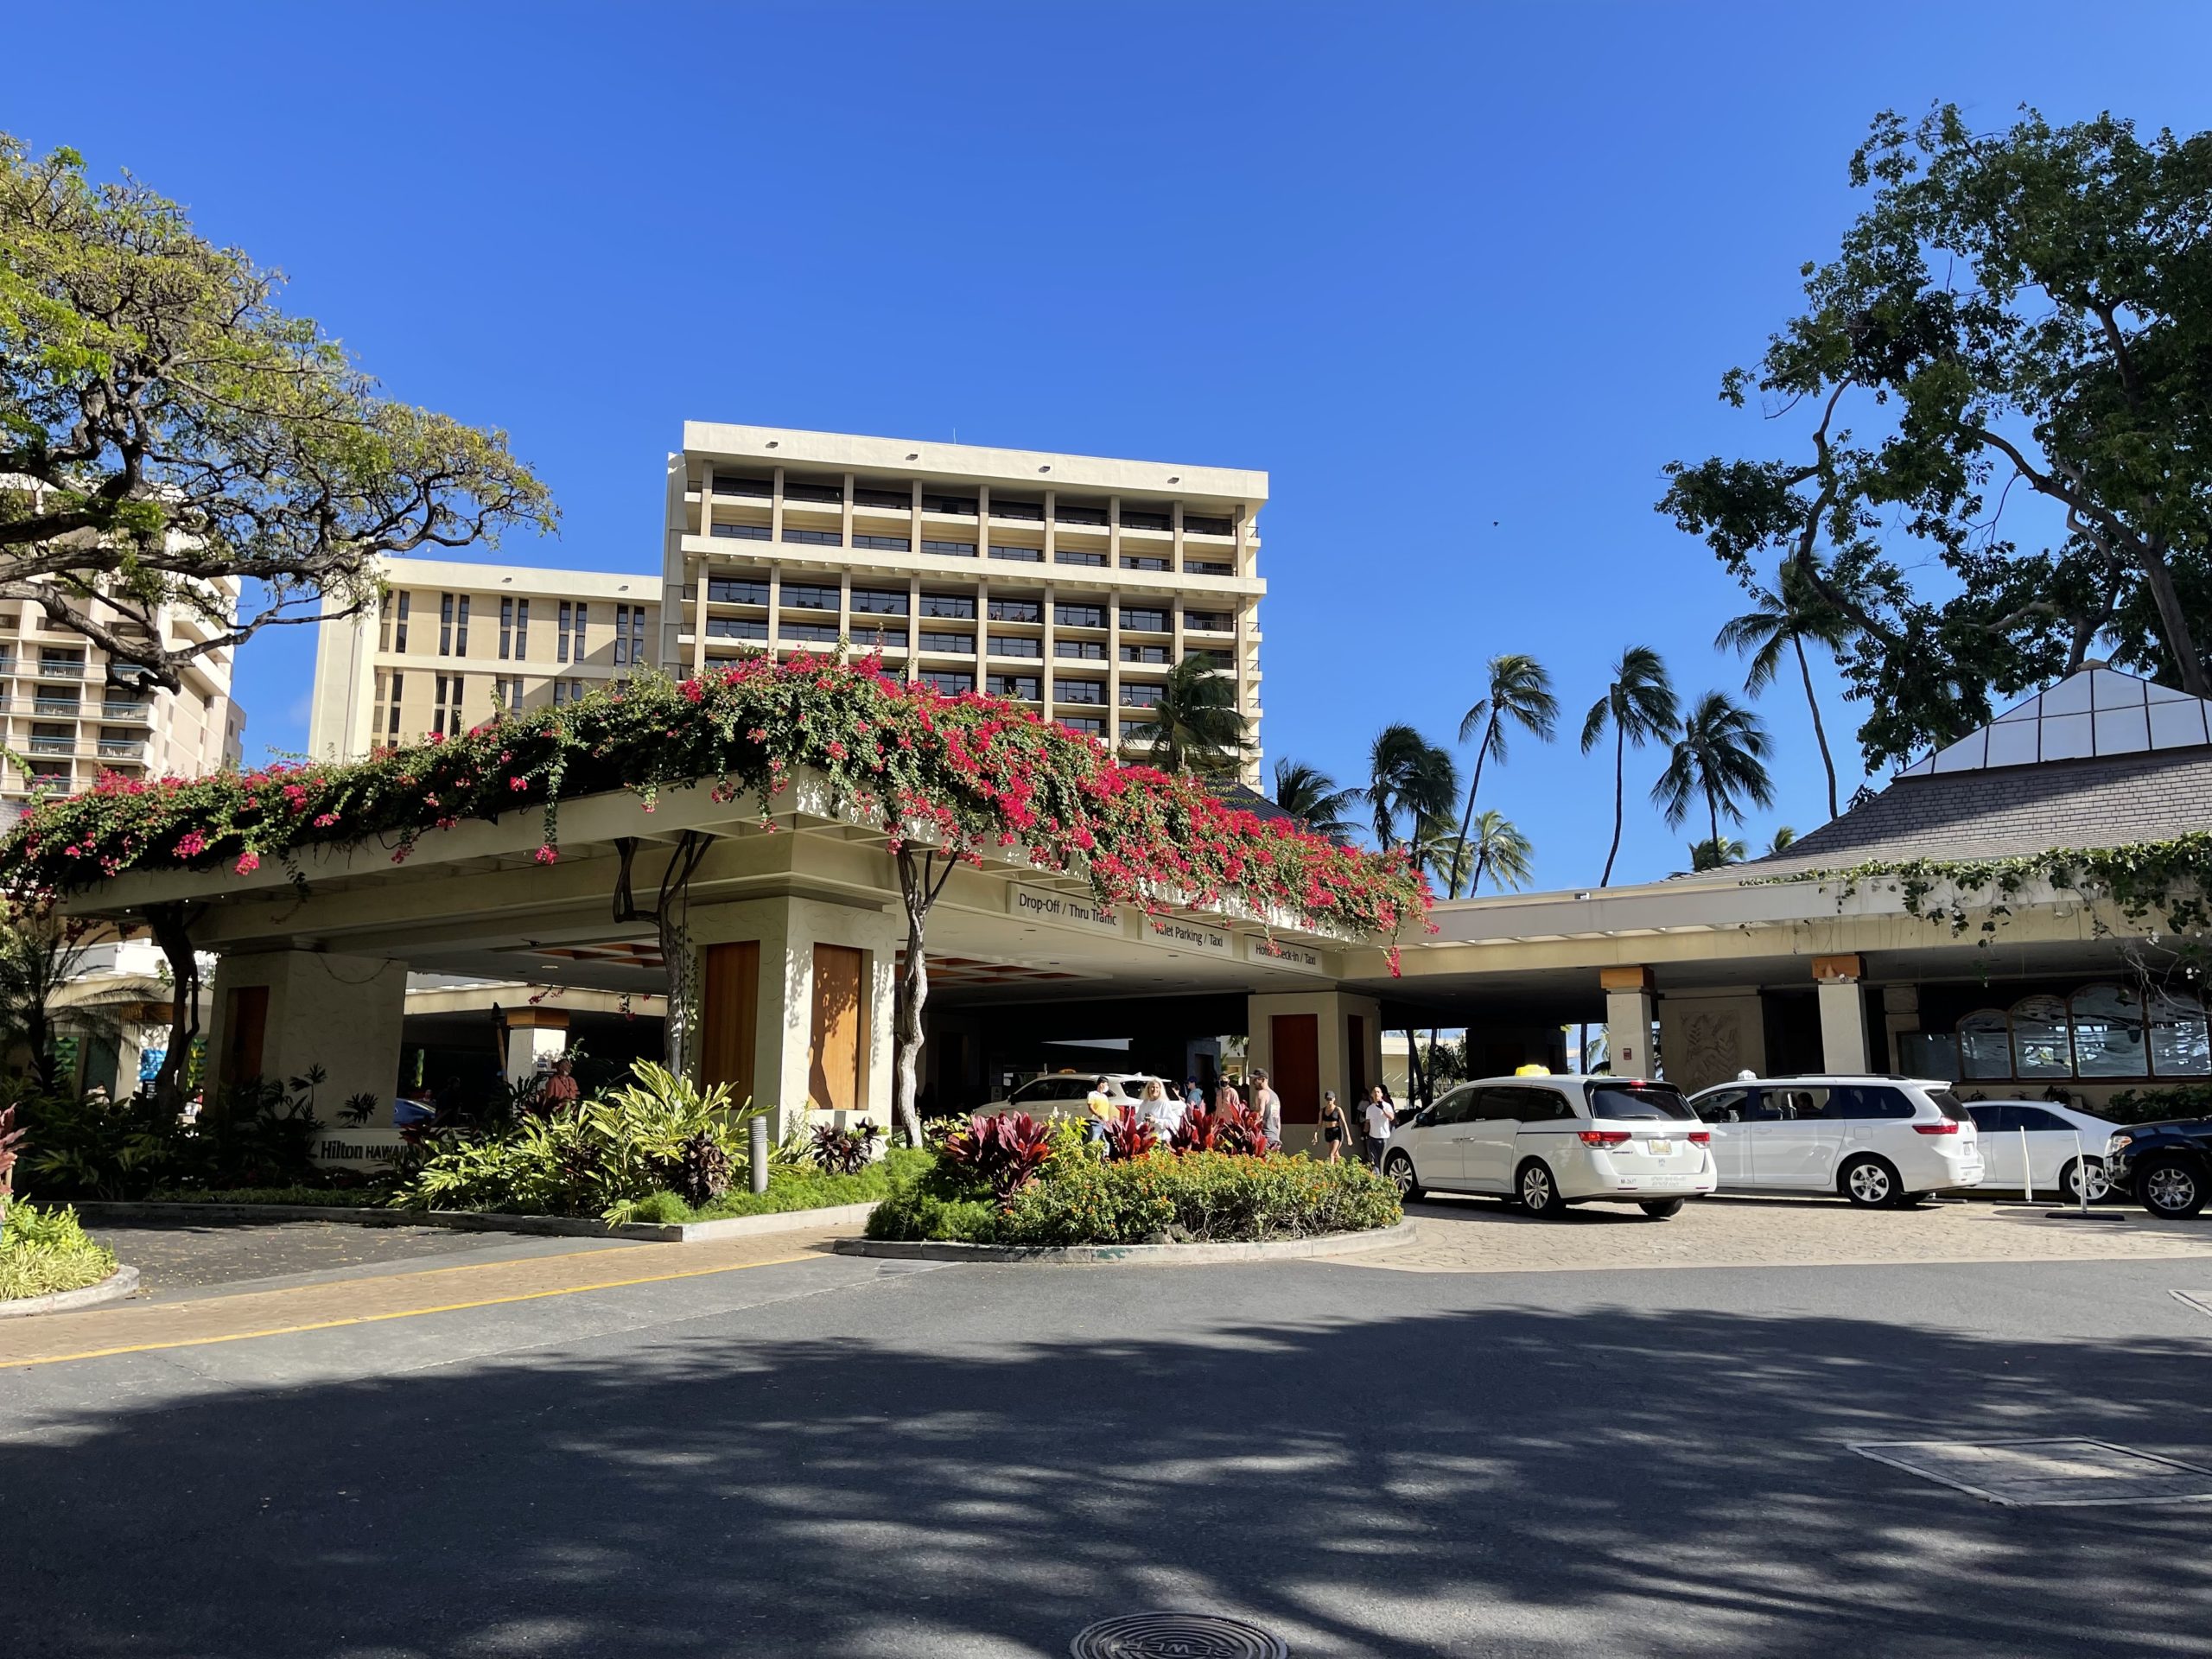 Review: Another Fun Stay at the Hilton Hawaiian Village - TravelUpdate